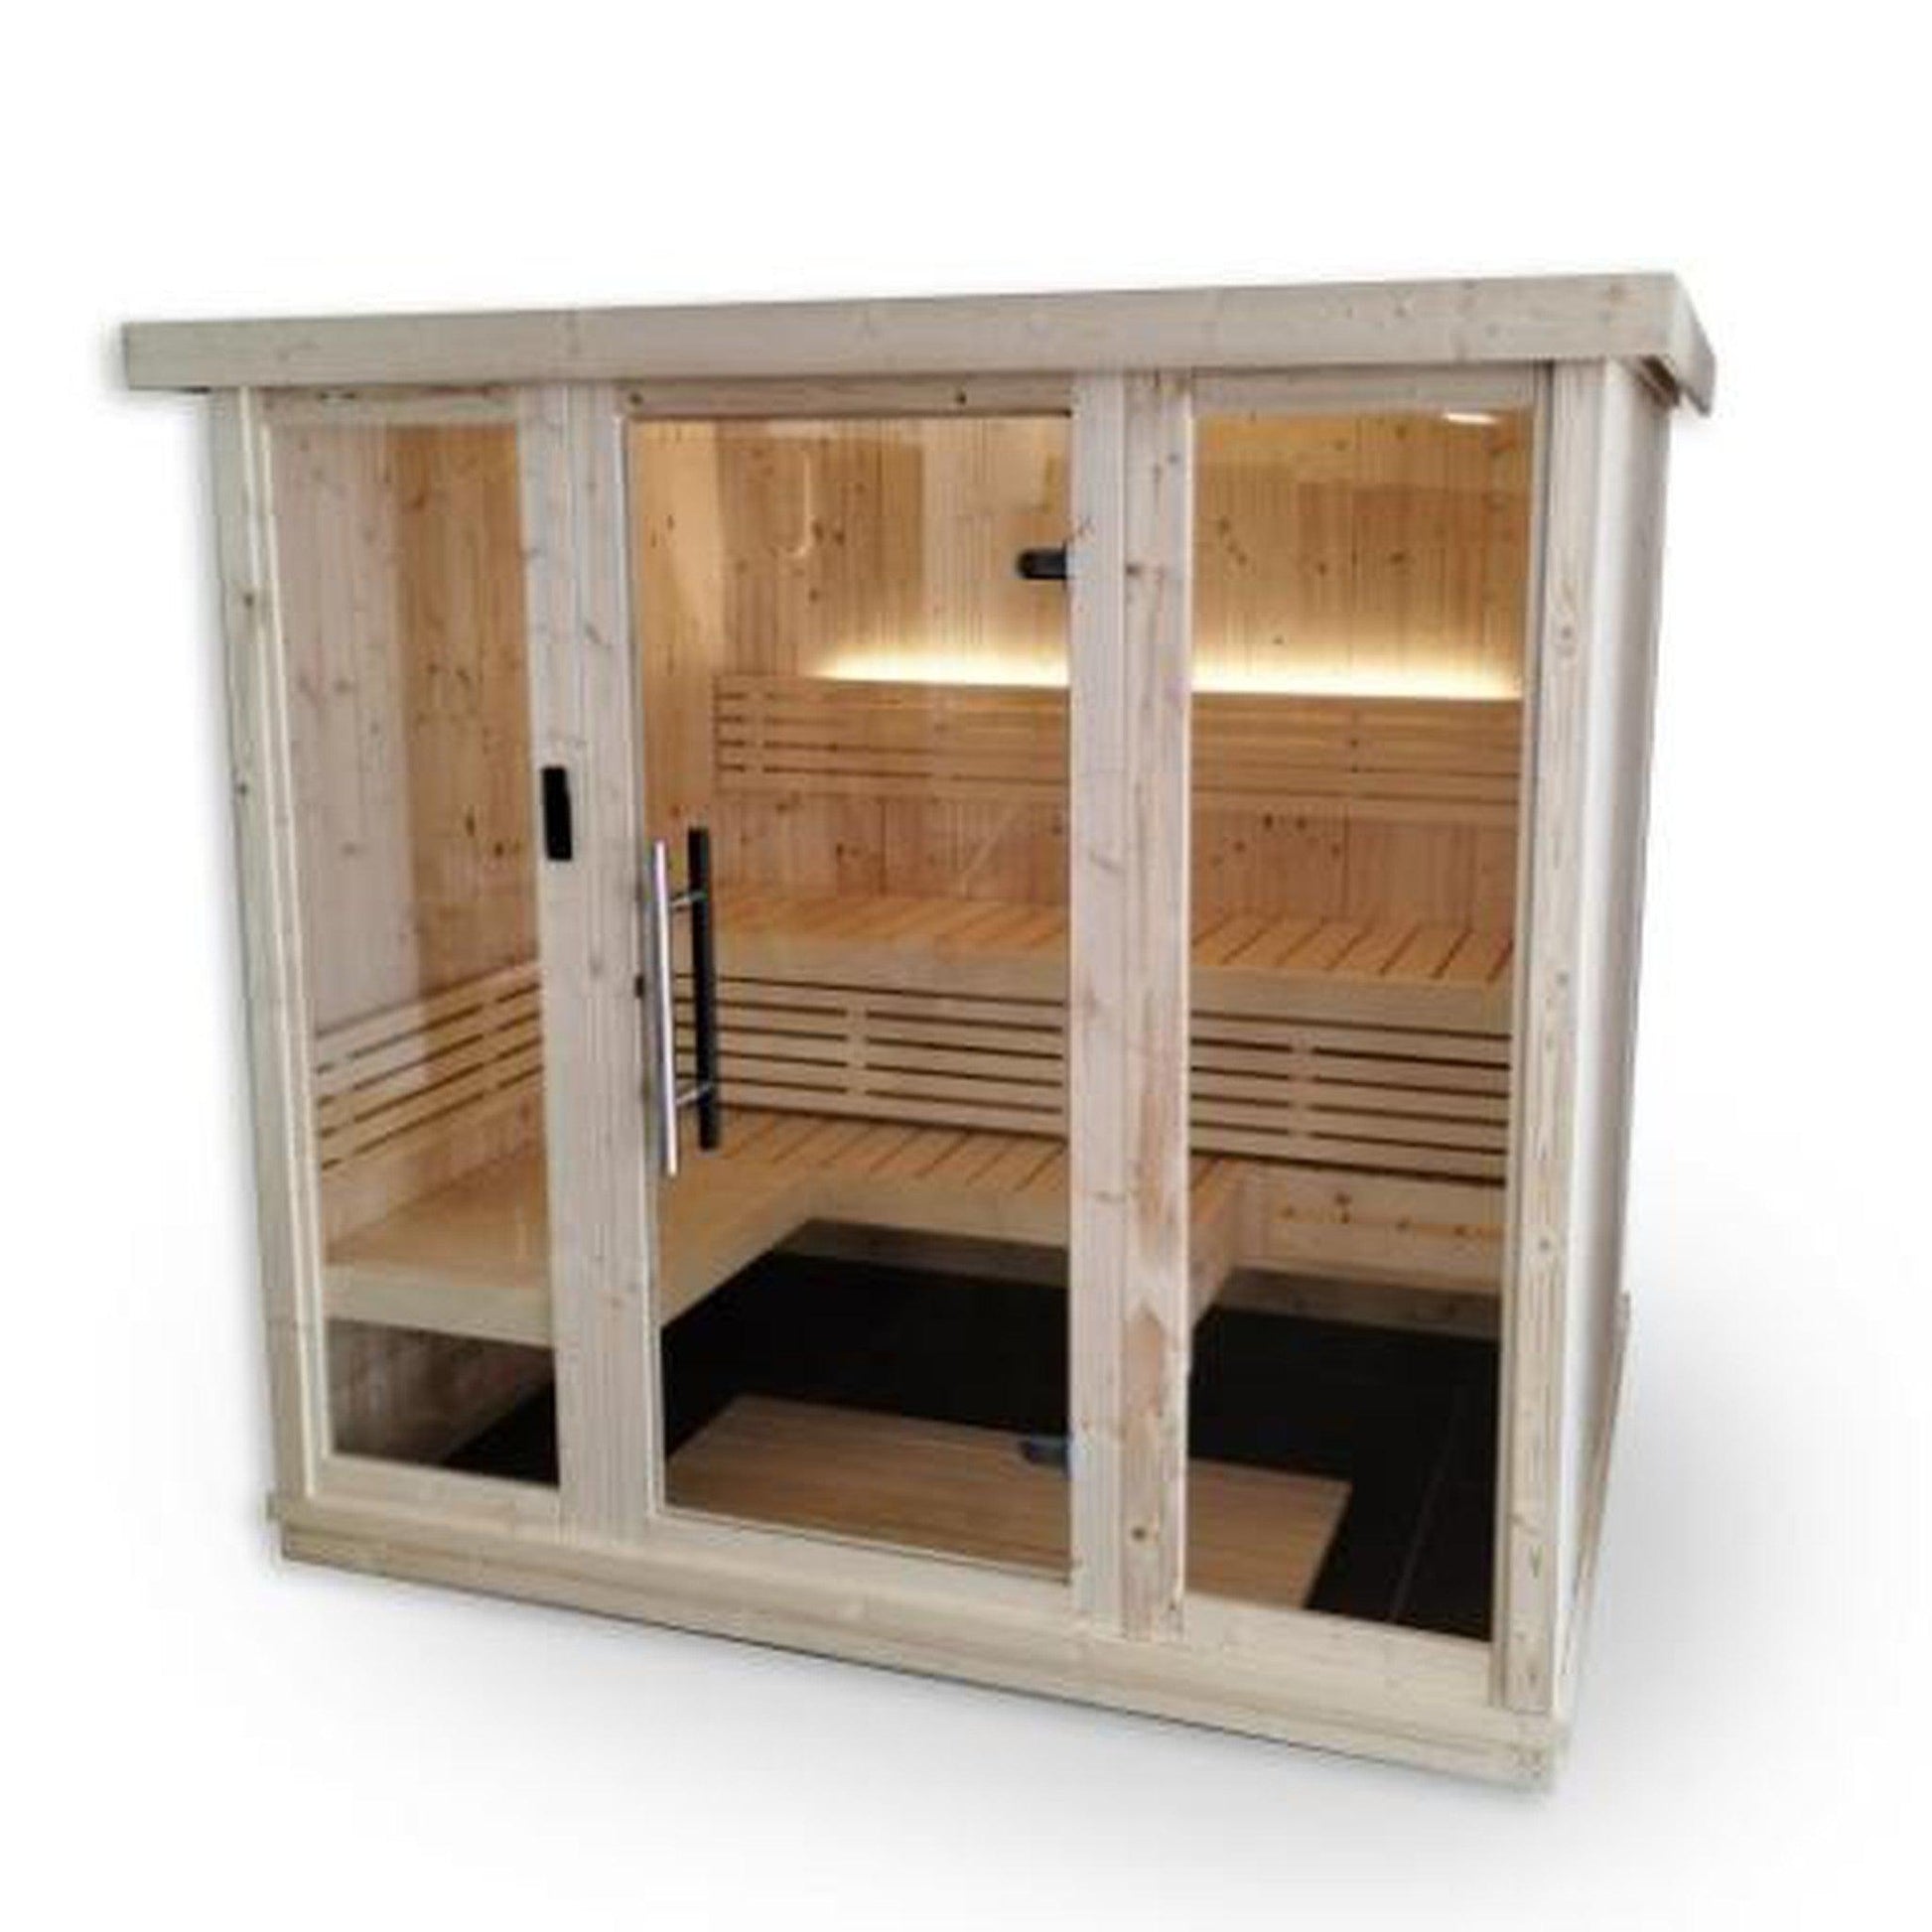 SaunaLife XPERIENCE Series Model X7 Indoor Home Sauna DIY Kit With LED Light System (Up to 6-Person)